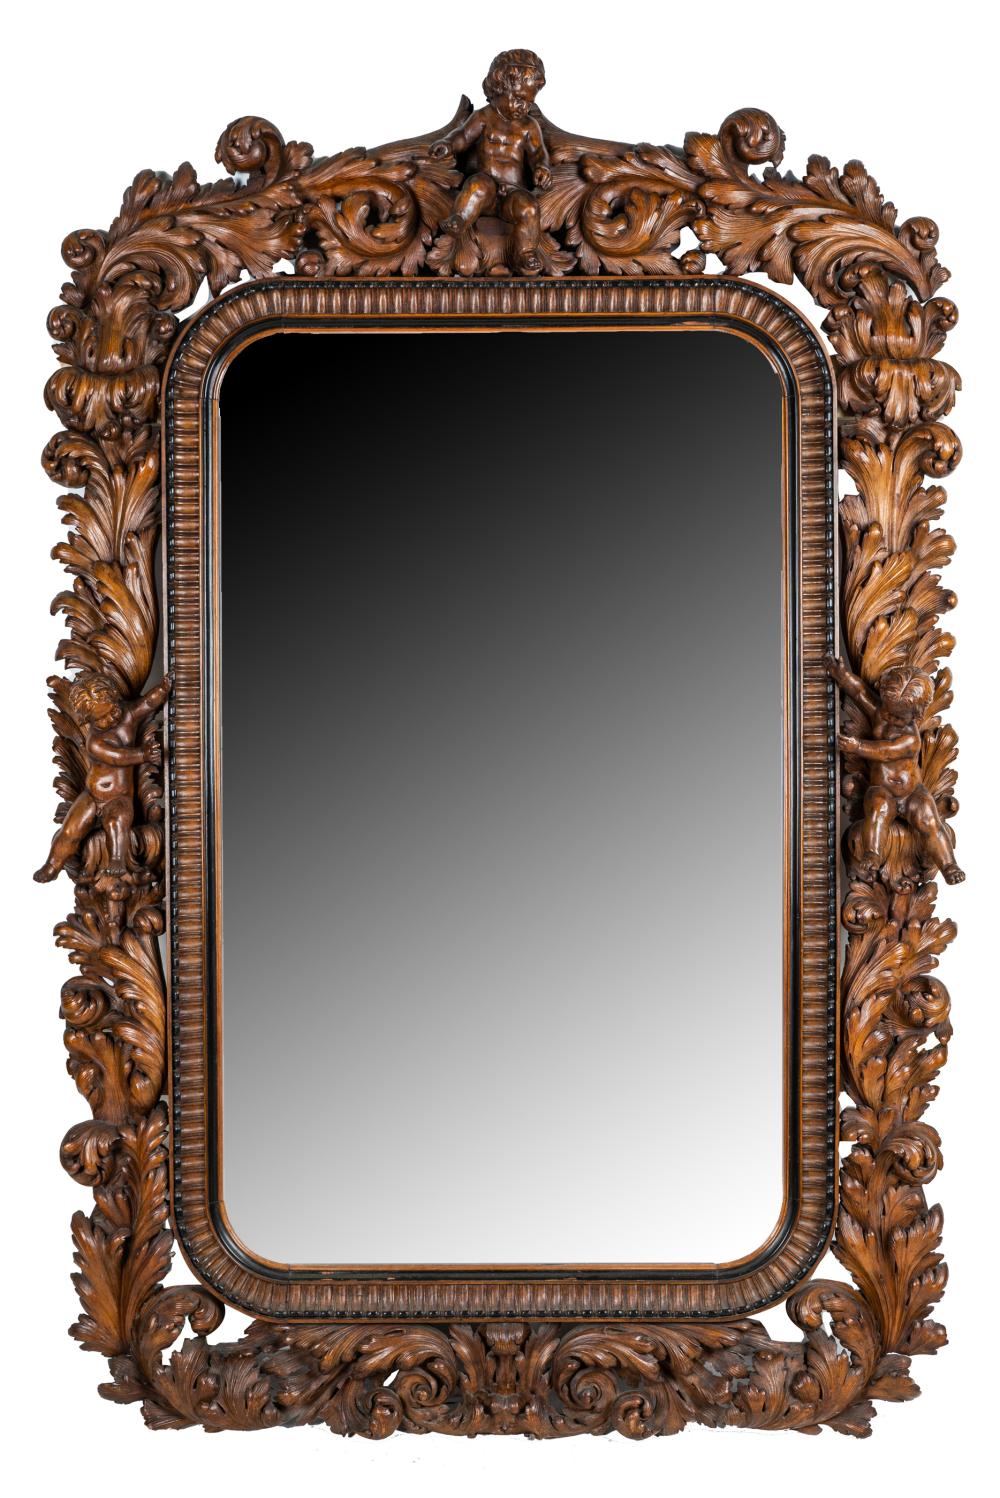 ITALIAN CARVED WOOD WALL MIRRORthe 332a85